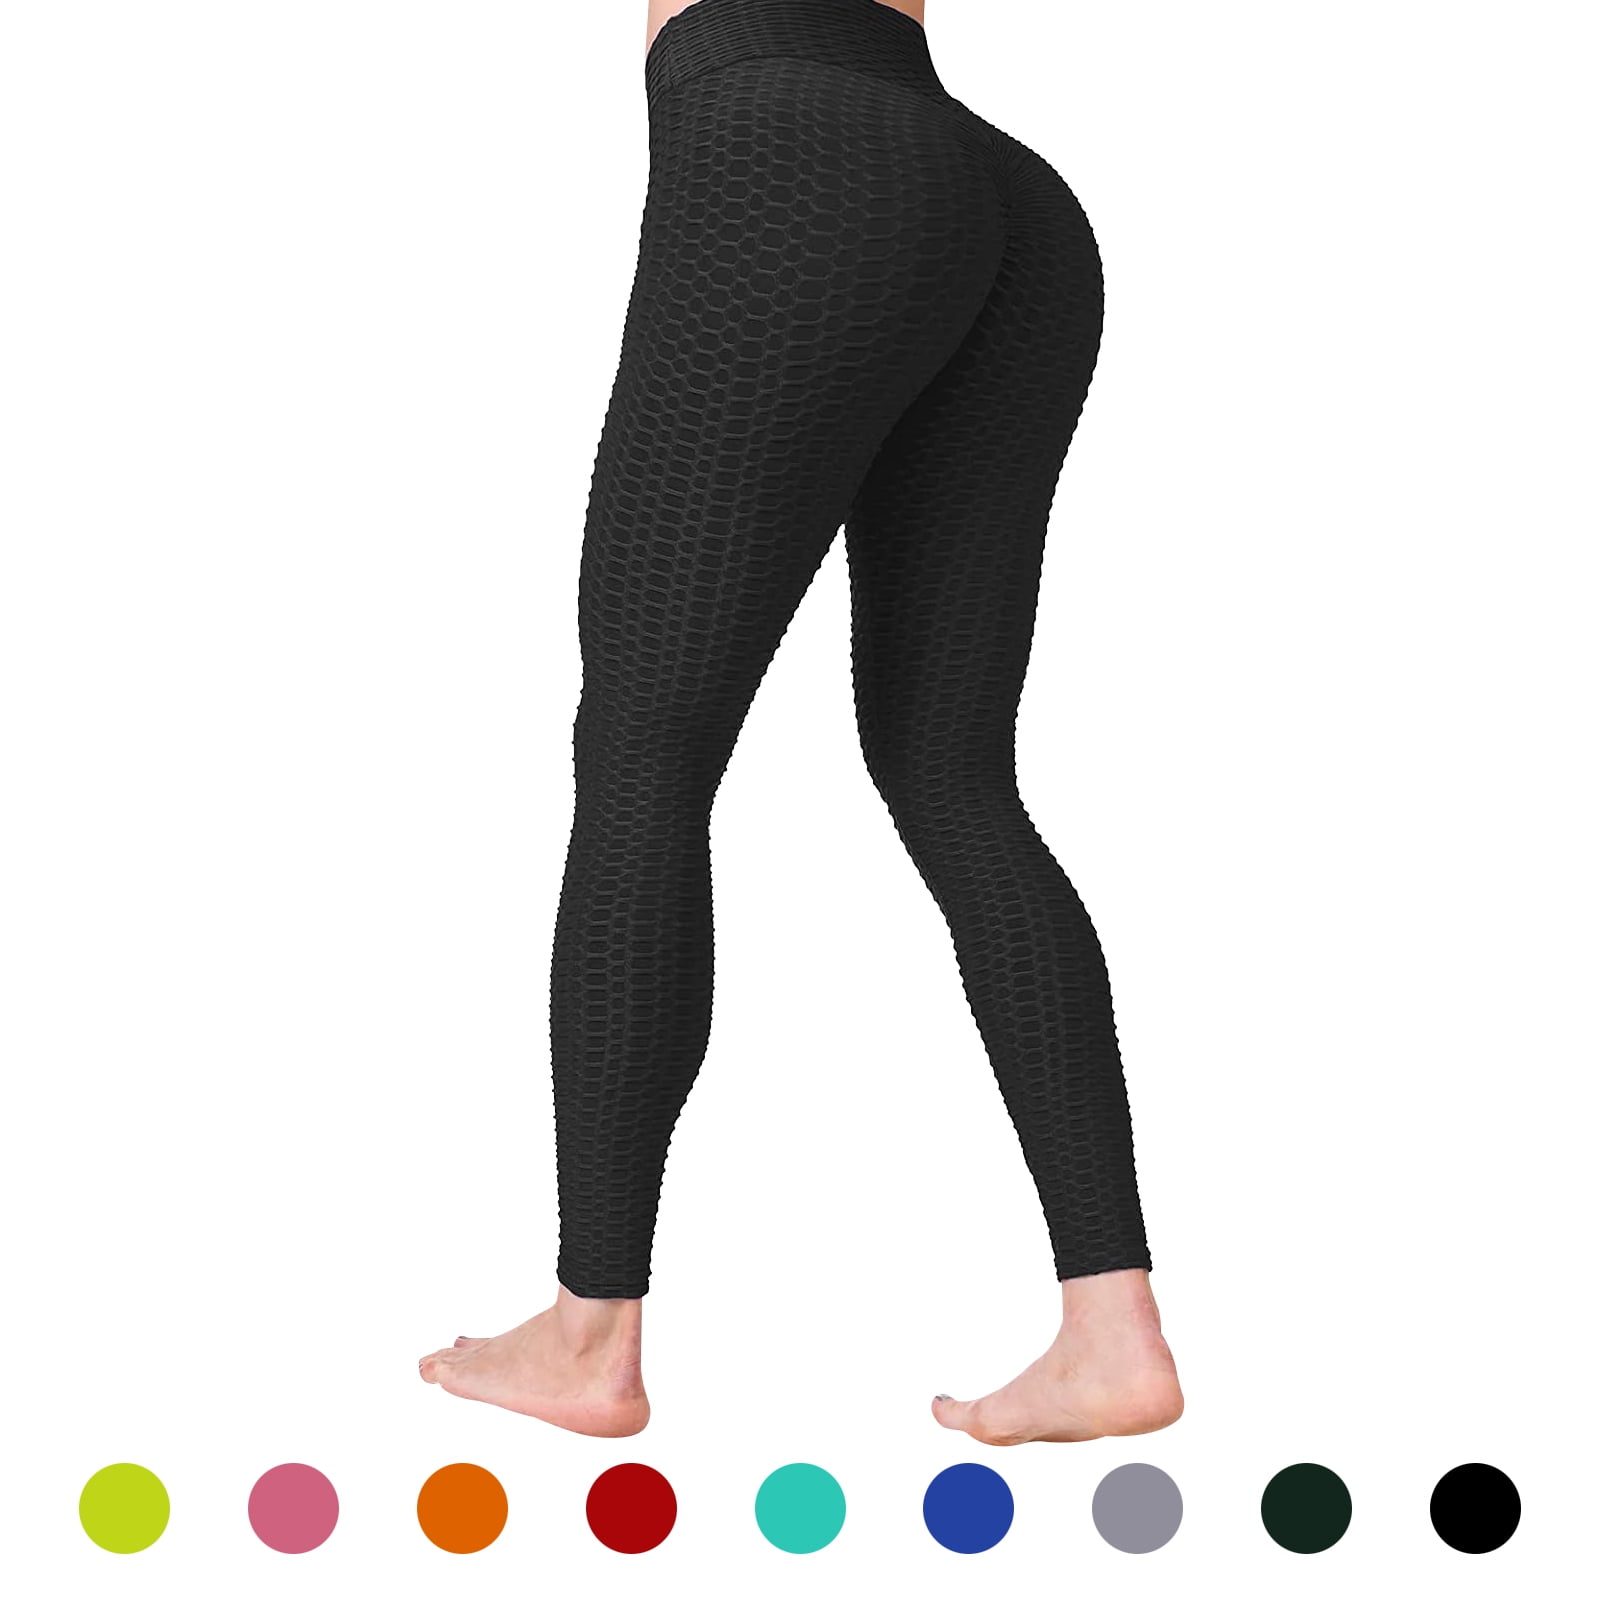  HSQSMWJ Women's Anti-Cellulite Push Up Seamless Scrunch Bum  Shorts High Waisted Tummy Control Butt Lifting Gym (Color:Black,Size:S) :  Clothing, Shoes & Jewelry